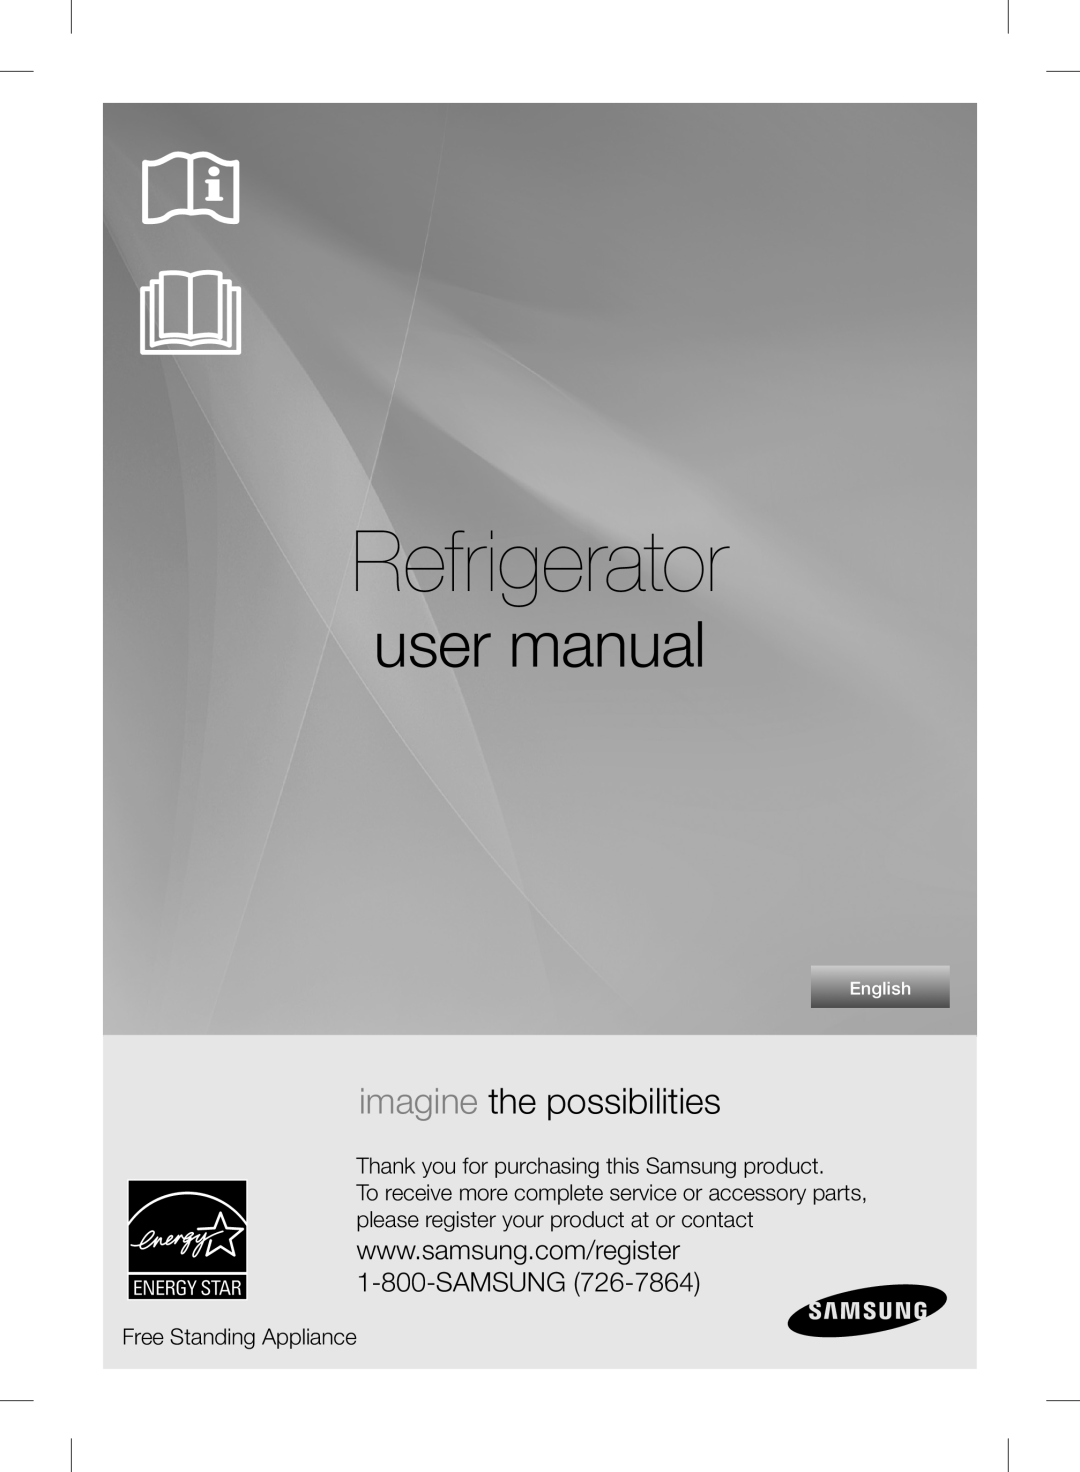 Samsung RF24FSEDBSR user manual Refrigerator, imagine the possibilities, Thank you for purchasing a Samsung product, 2014 